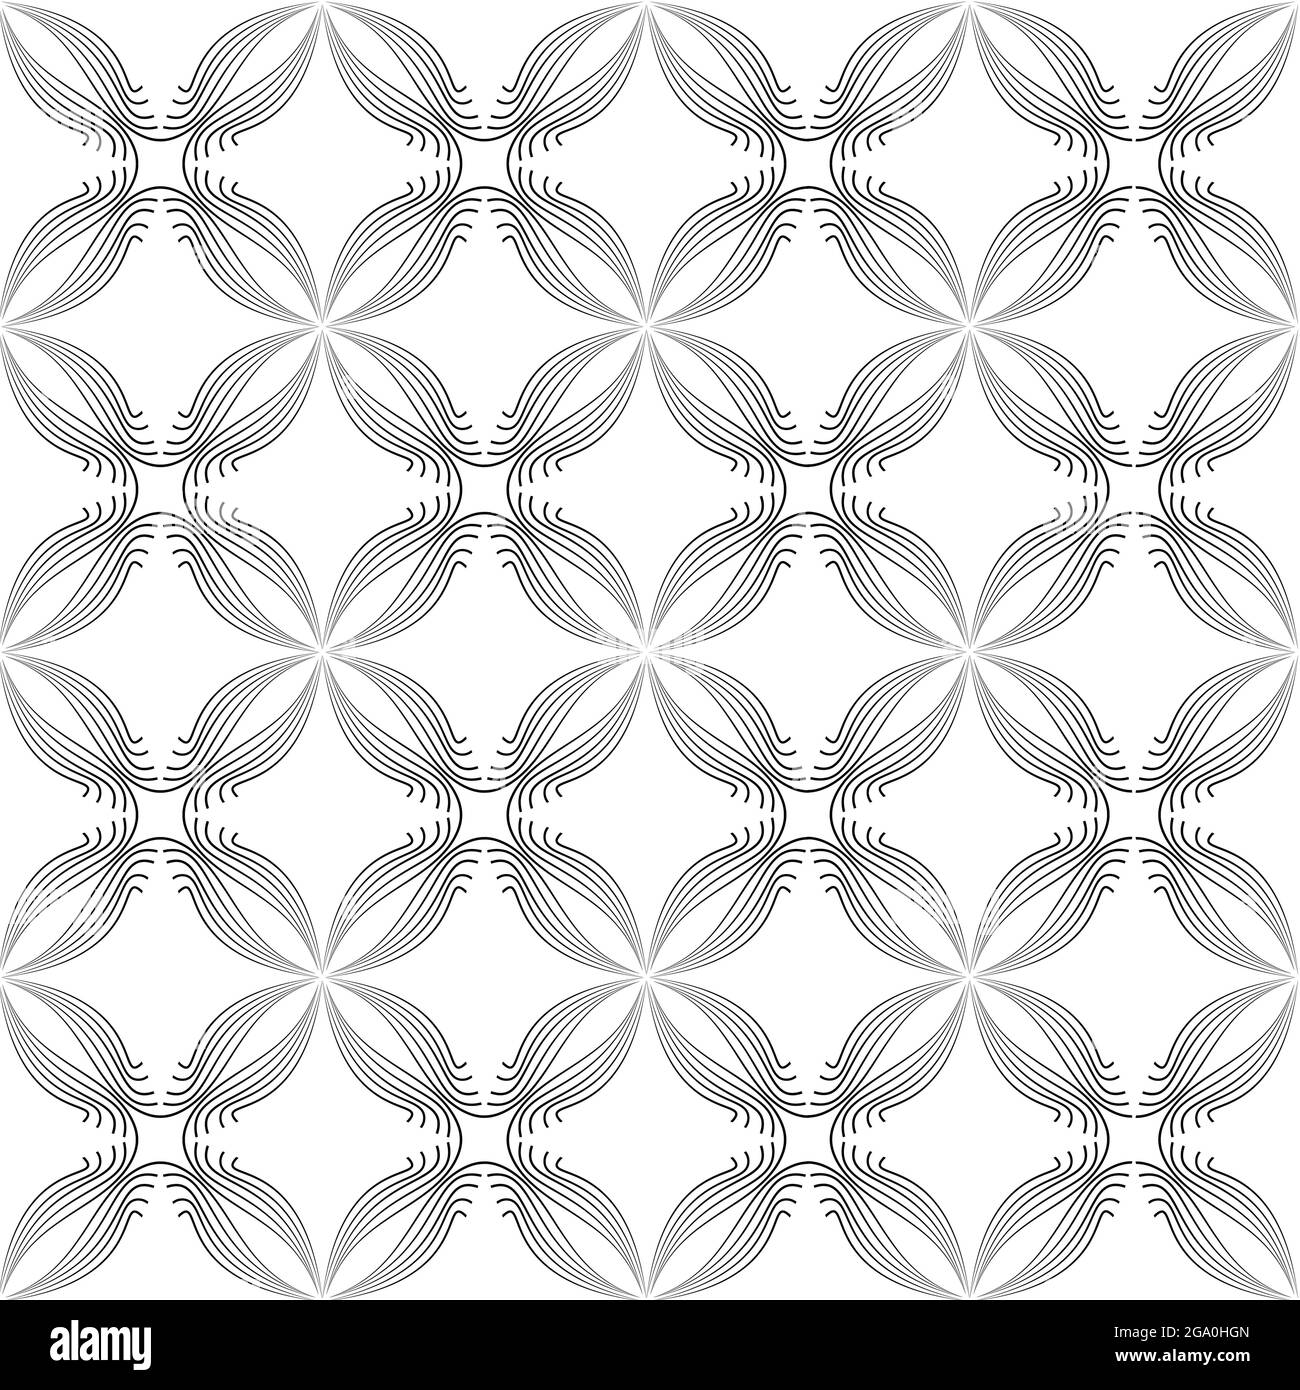 Abstract seamless floral line pattern. Arabic line ornament with flower shapes. Floral orient tile pattern with black lines. Asian ornament. Swirl geo Stock Vector